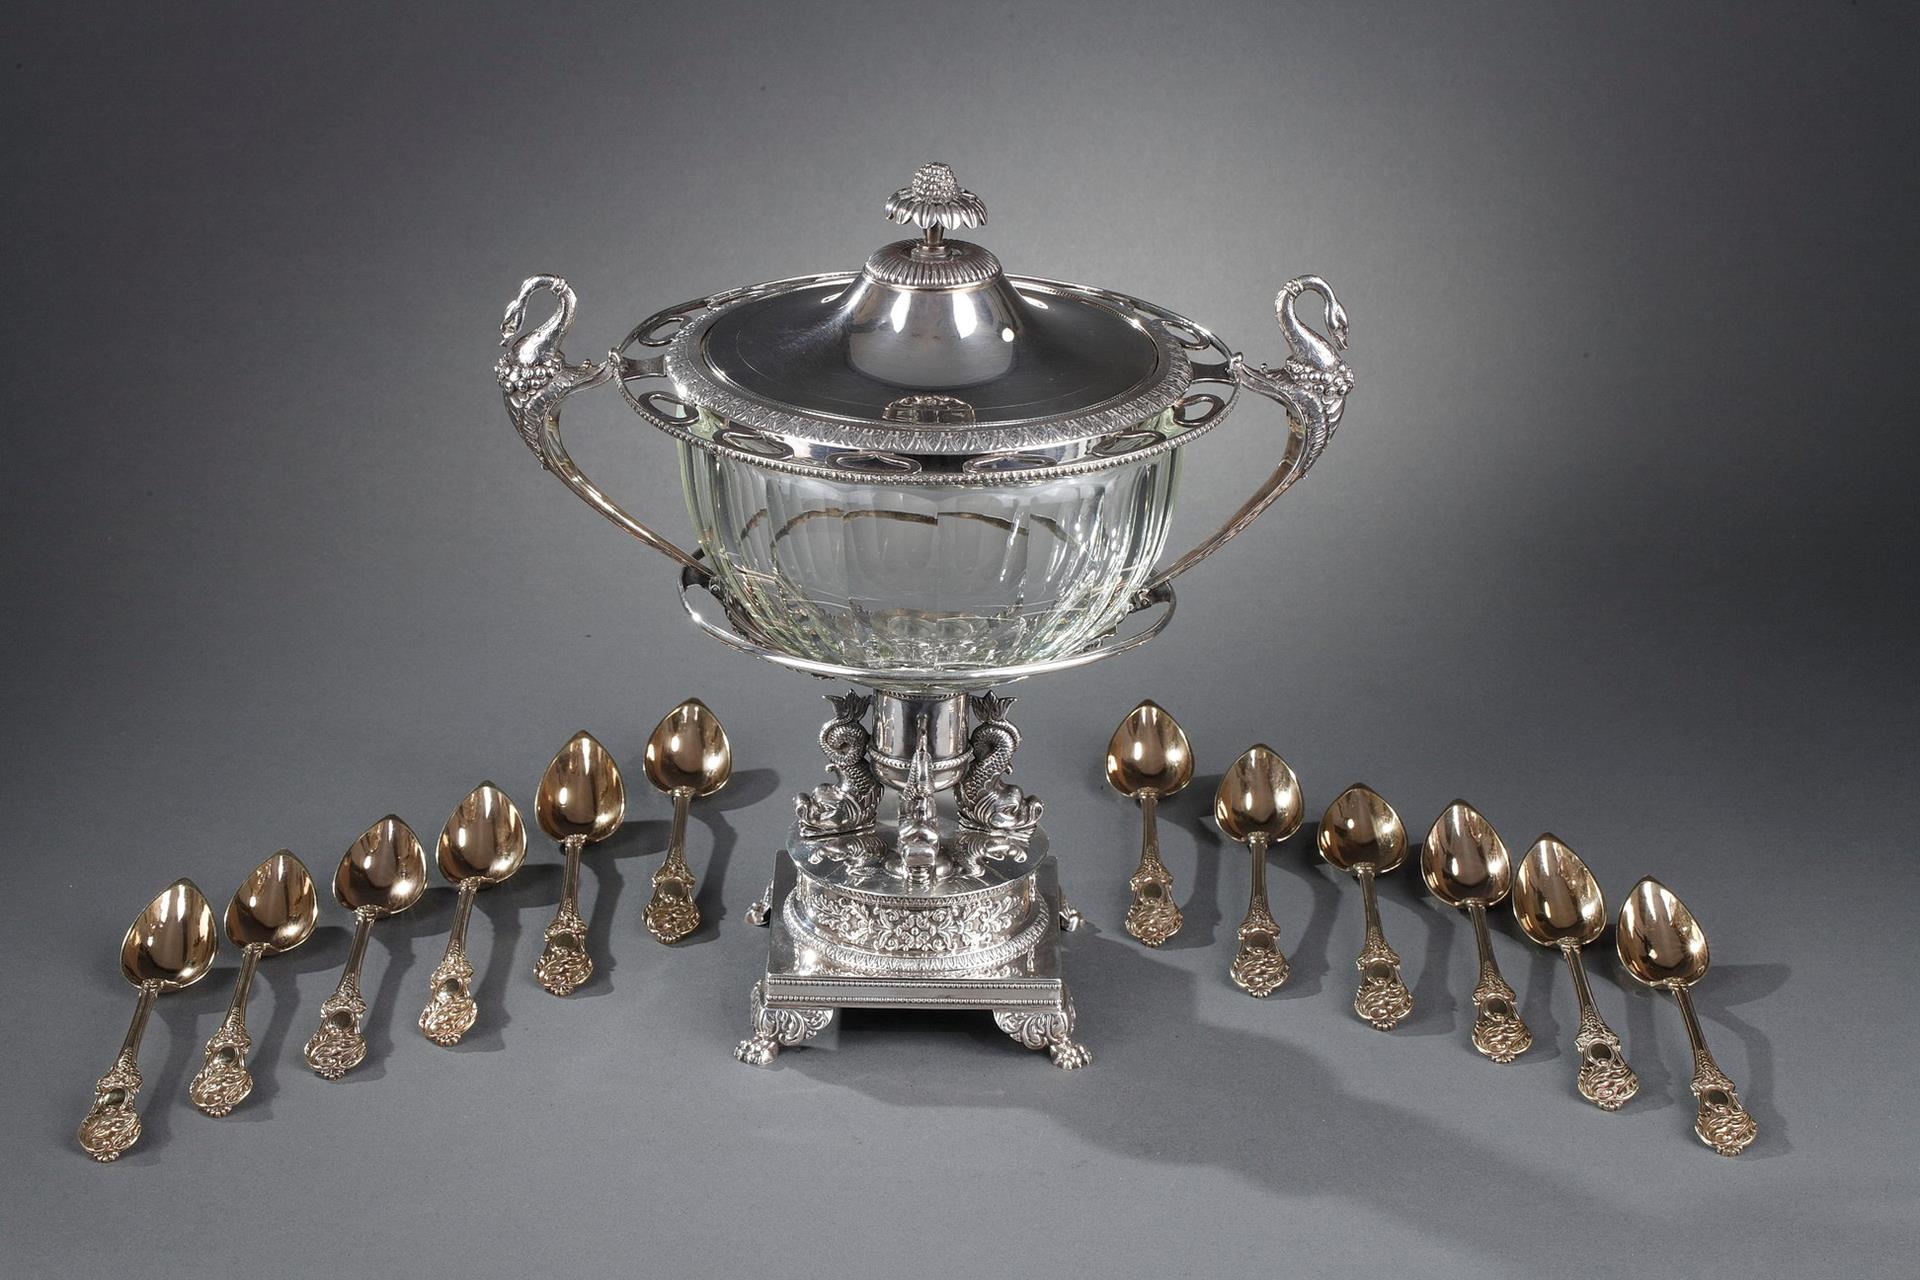 19th century LARGE SILVER AND CUT-CRYSTAL CONFITURIER,with 12 spoons. Restauration Period. 